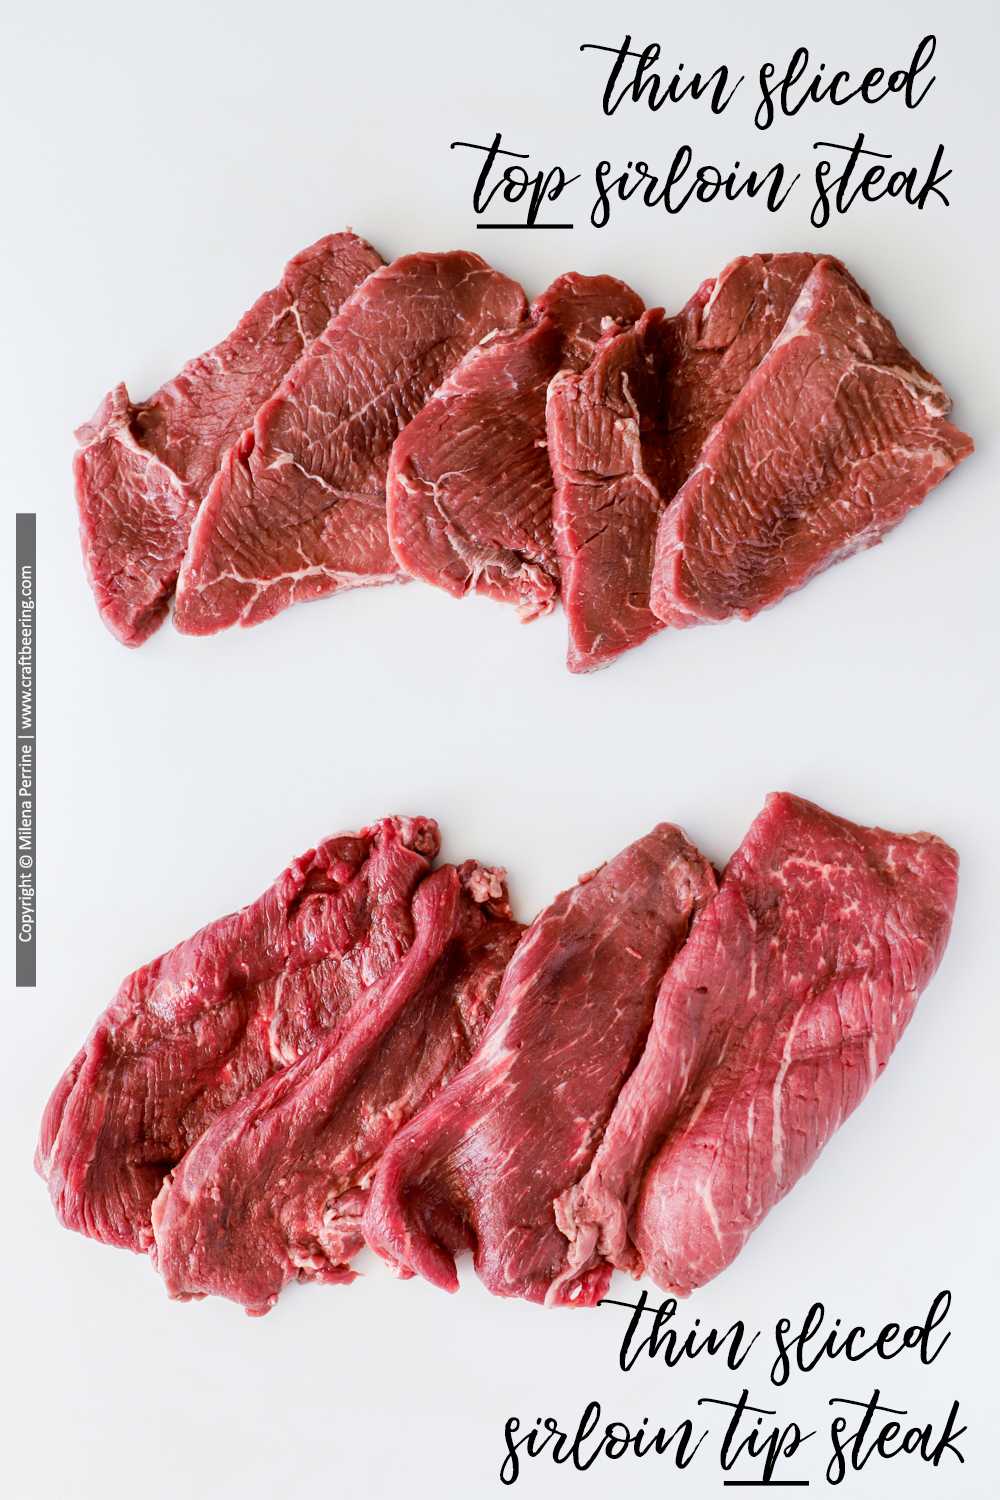 Difference between sirloin tip steak and top sirloin steak. Raw, thin sliced cuts compared.